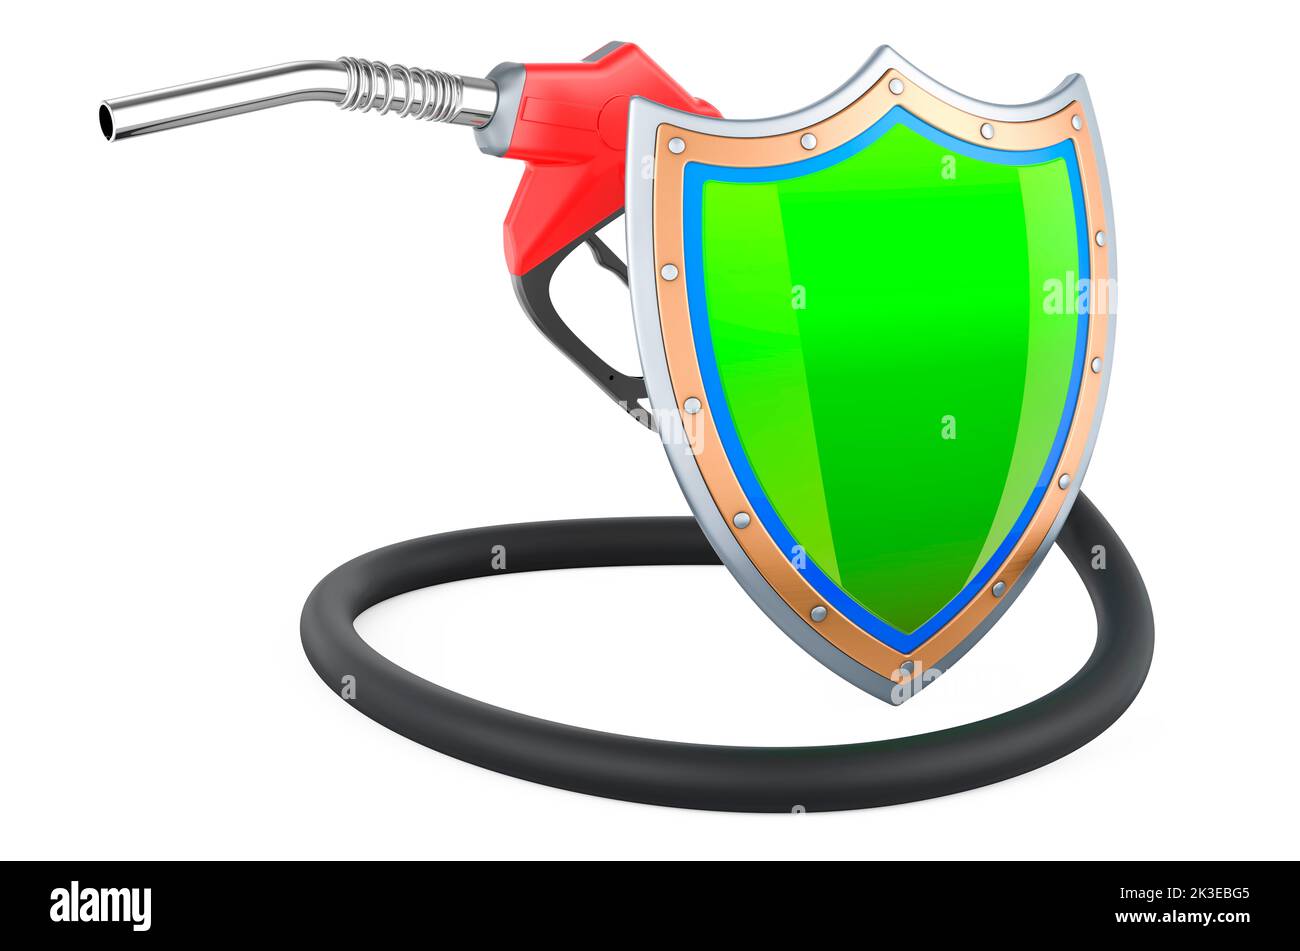 Fuel pump nozzle with shield, 3D rendering isolated on white background Stock Photo